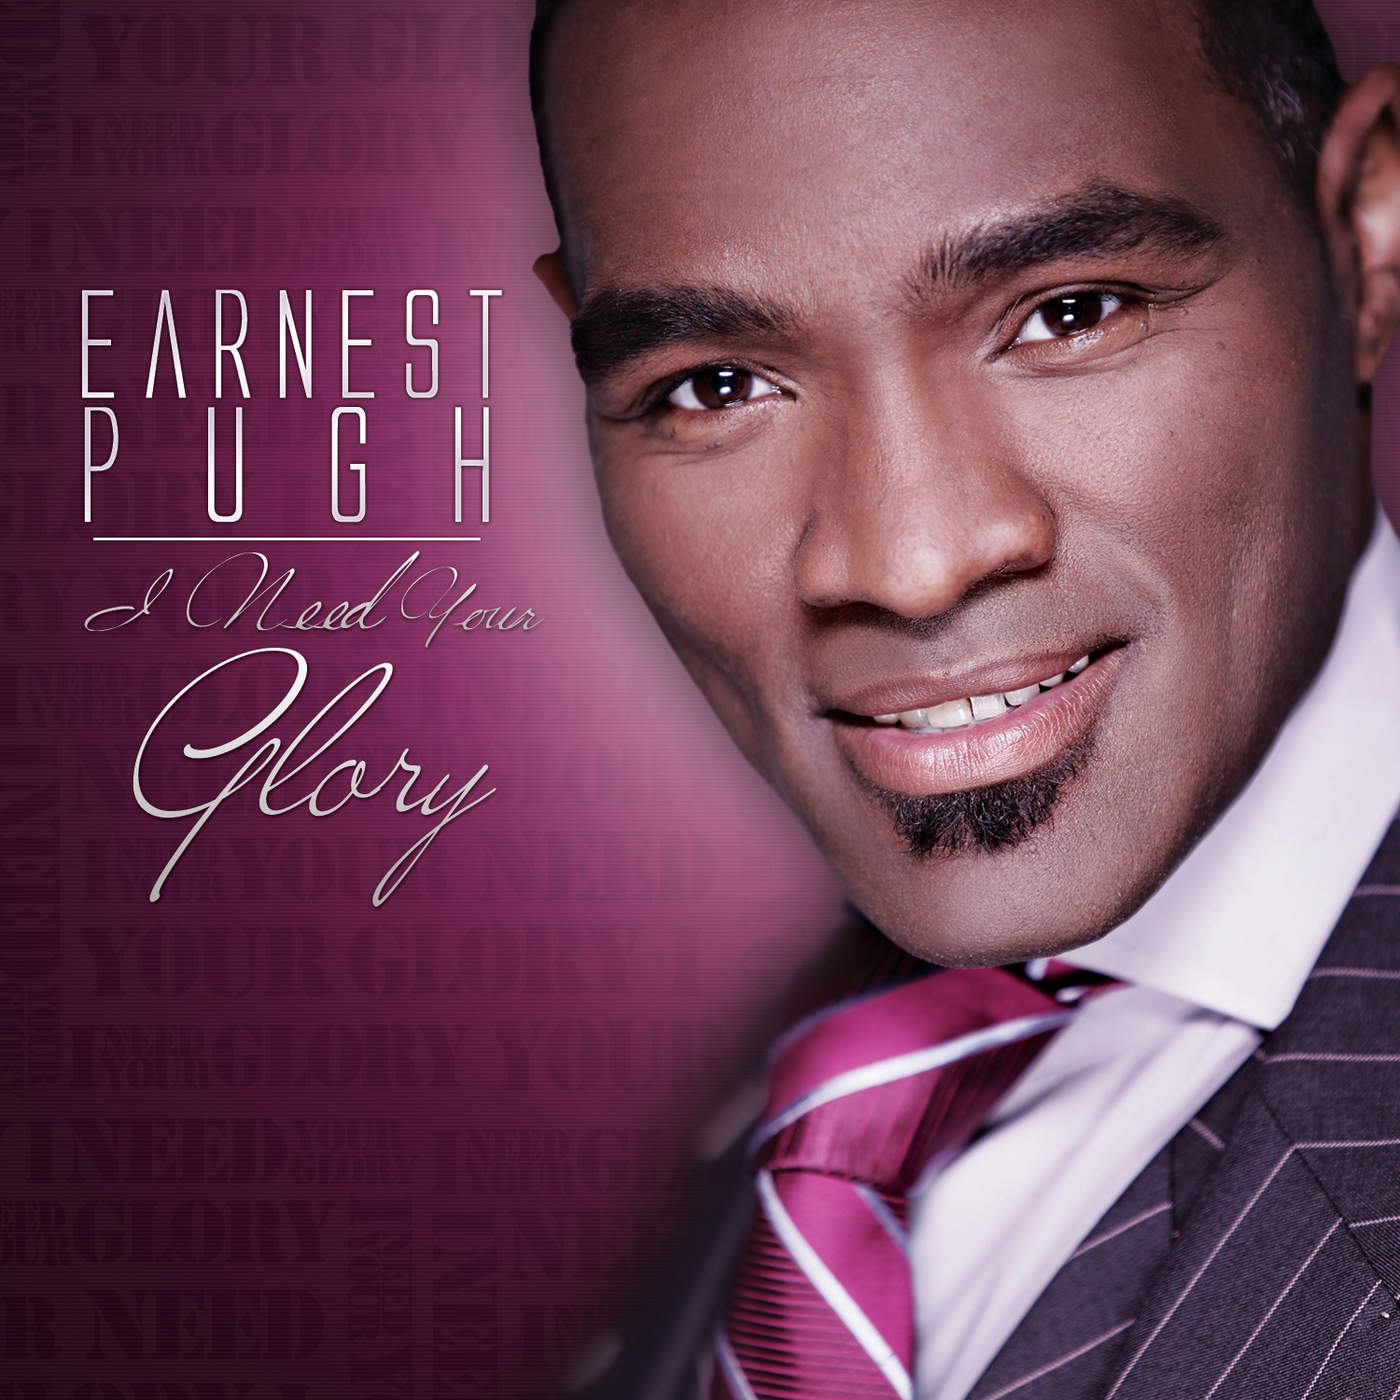 Art for I Need Your Glory by Earnest Pugh